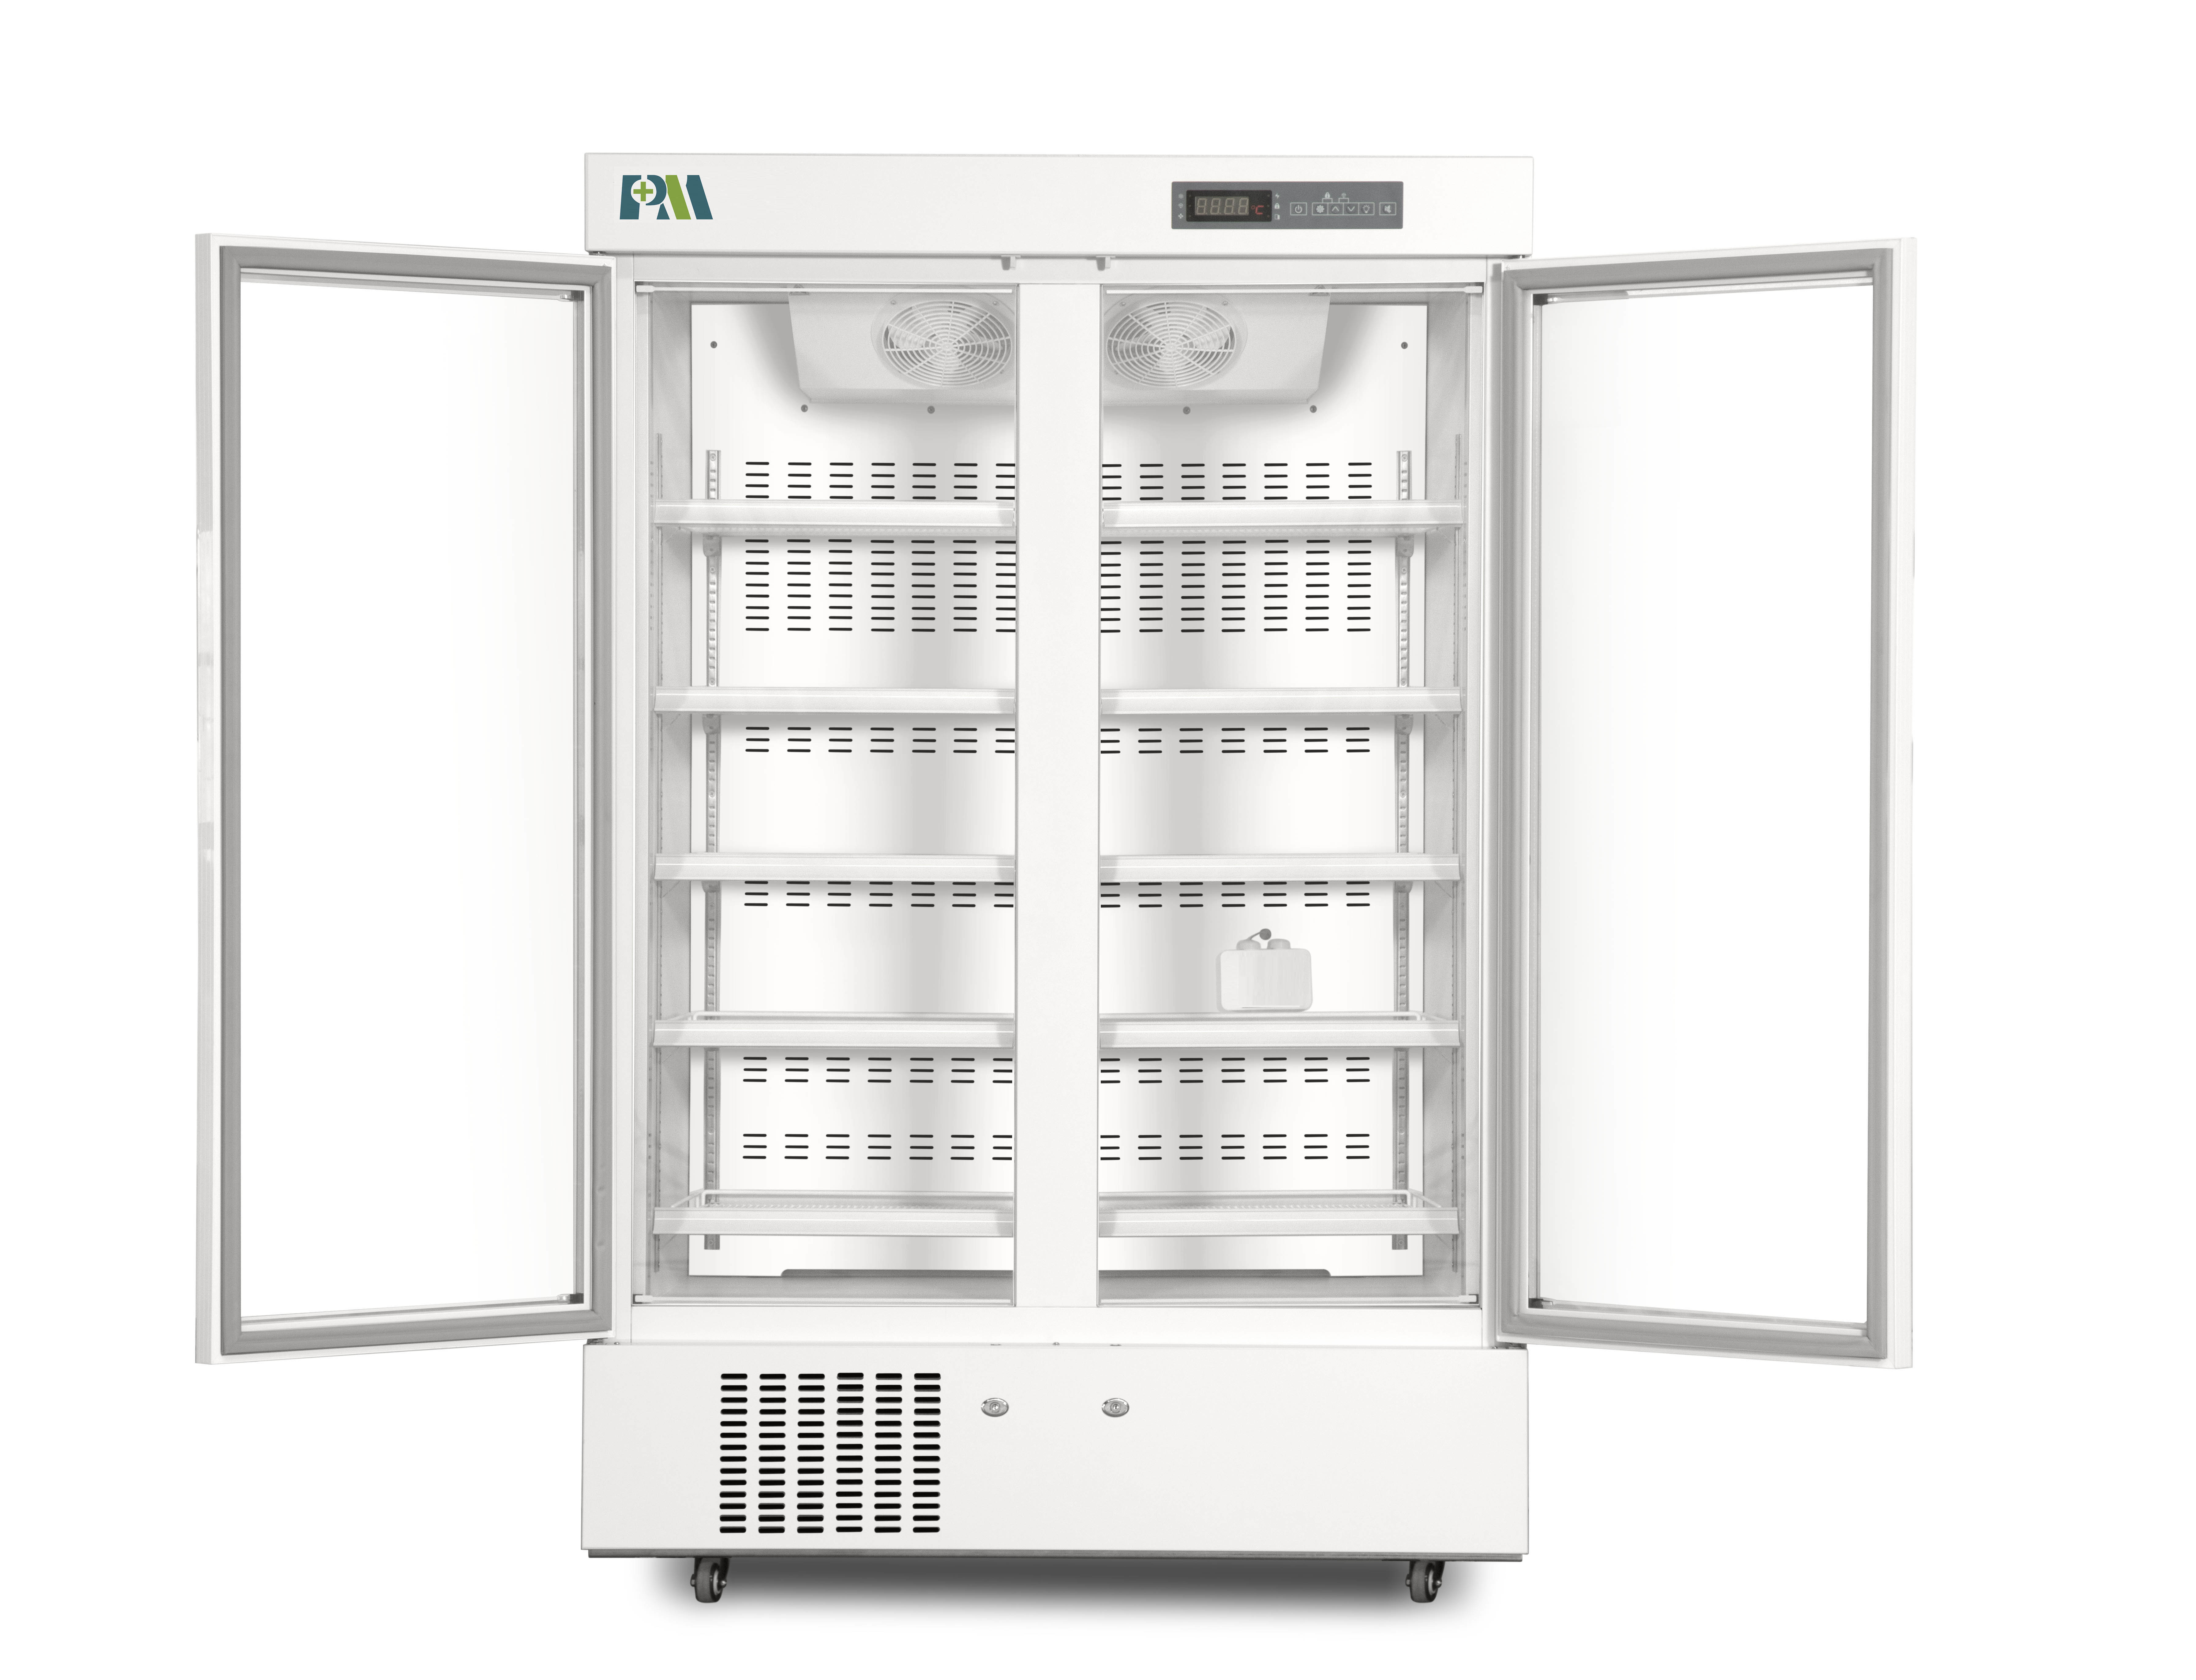 Forced Air Cooling Pharmacy Grade Fridge 485L 2 To 8 Degree